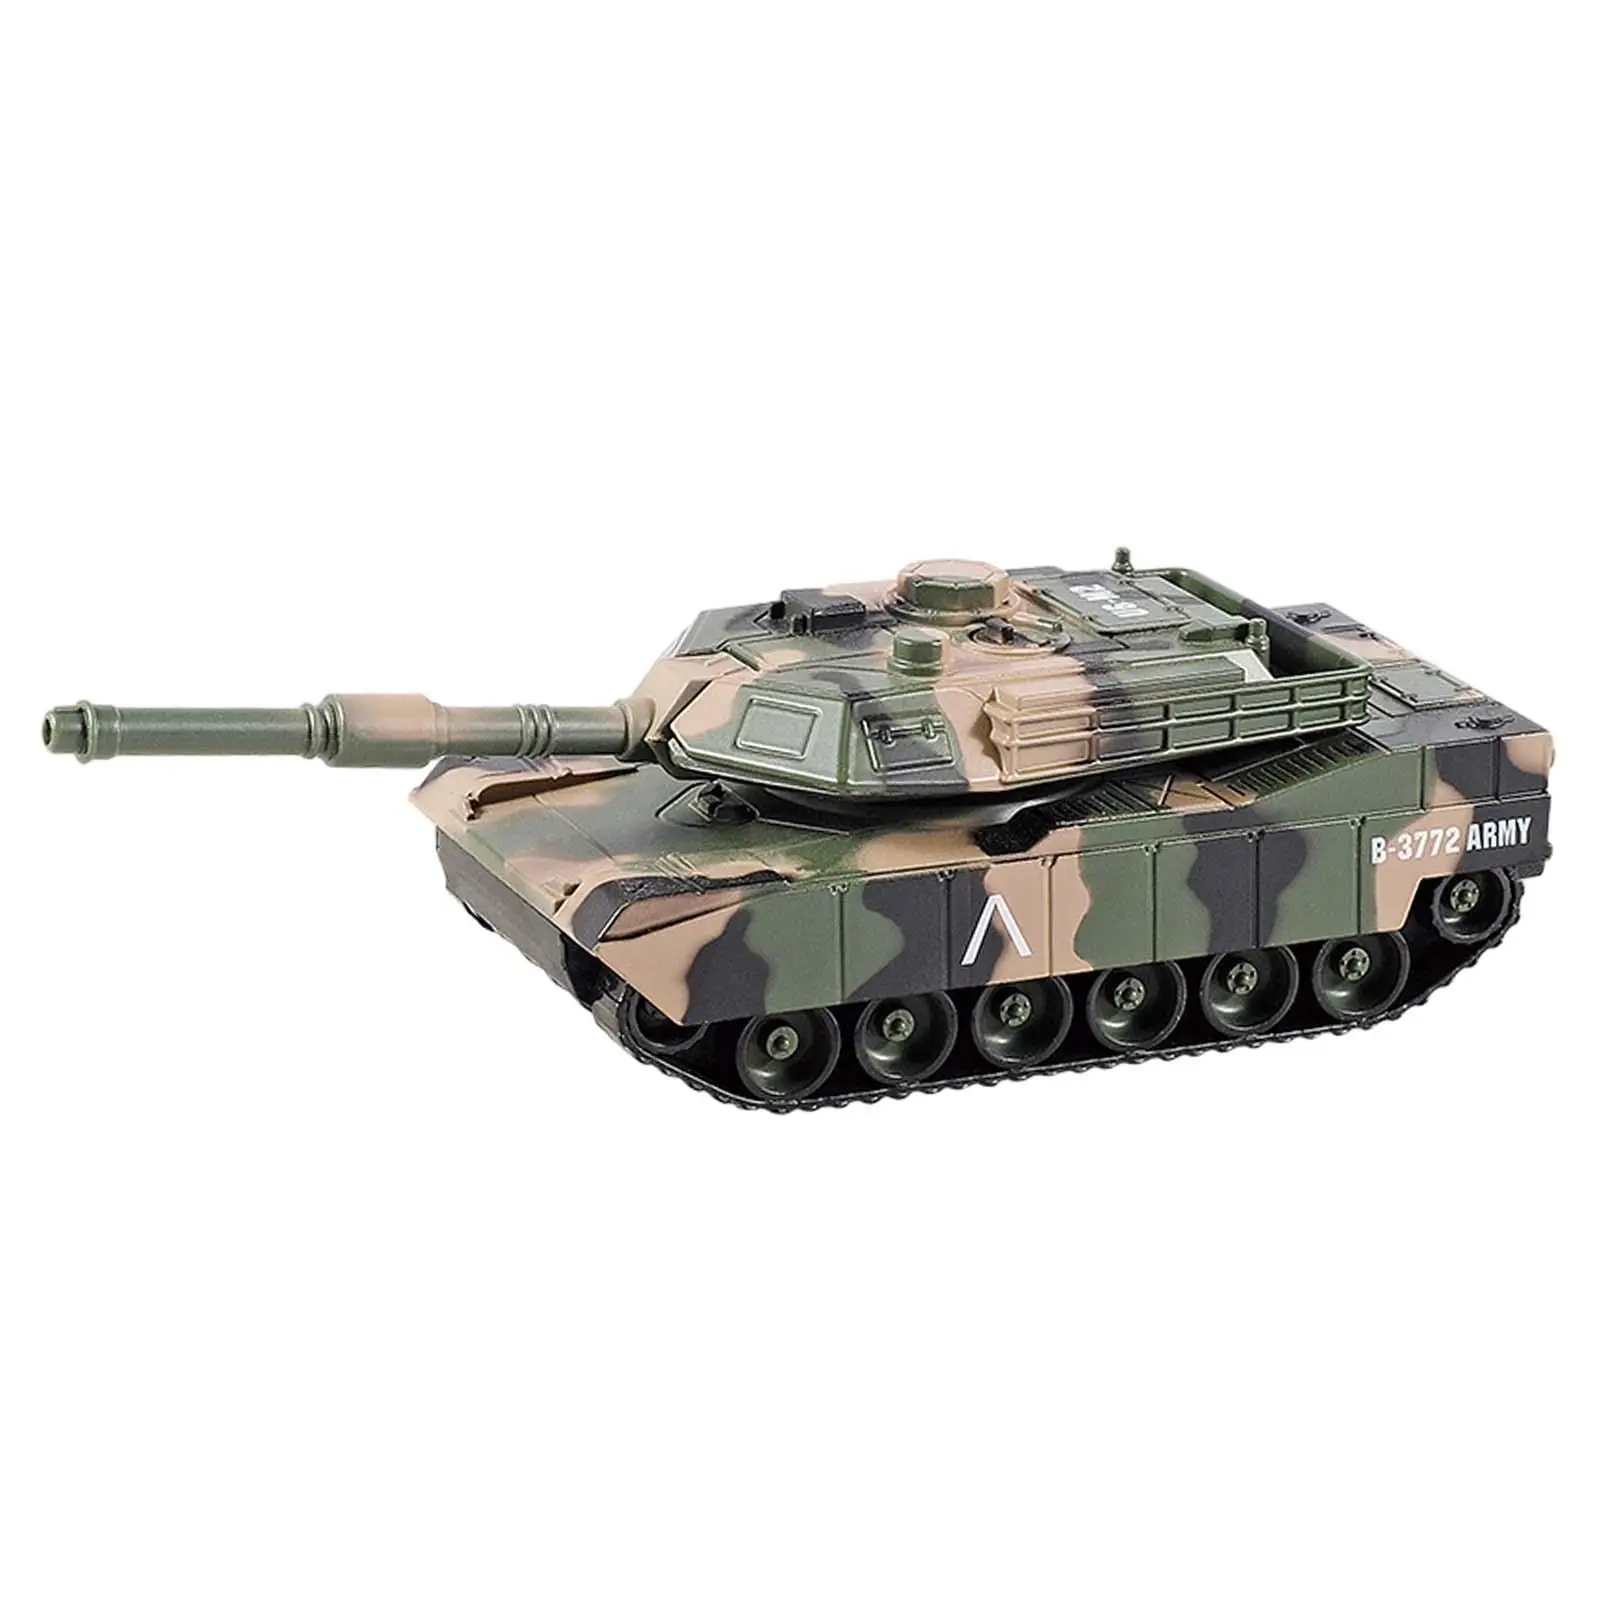 1/24 Scale Tank Toy Realistic Pullback Motion Rotating Fort Vehicle Pull Back Tank Toy for 3-7 Years Old Kids Boys Birthday Gift